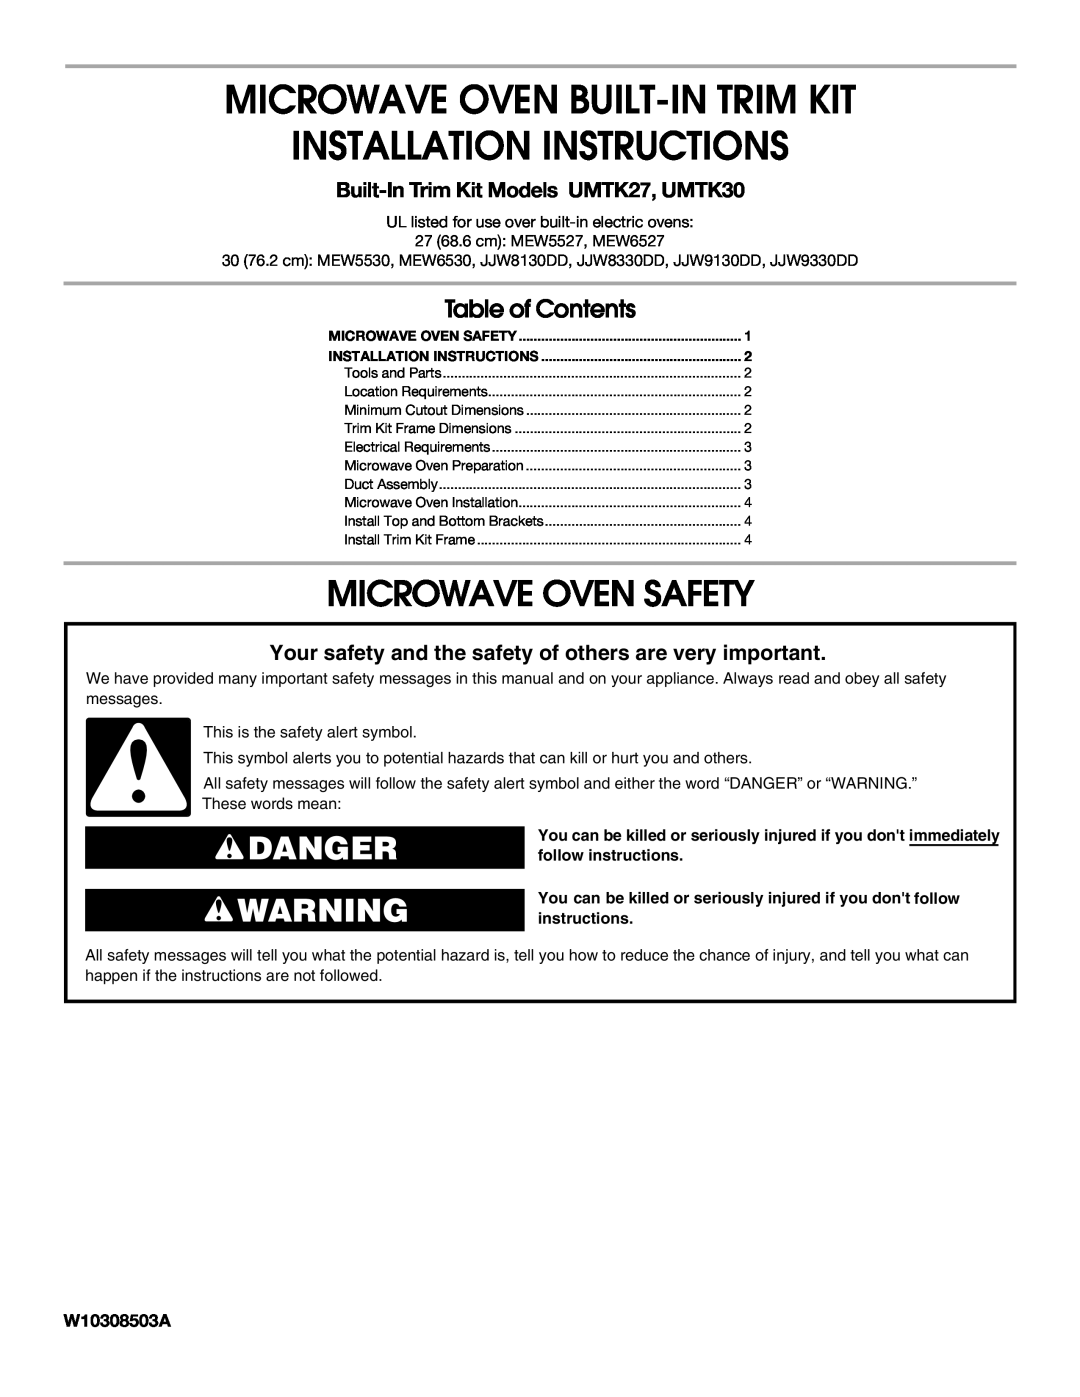 Amana JJW8130DD, JJW8330DD, MEW6527 installation instructions Microwave Oven Safety, W10308503A, Danger, Table of Contents 